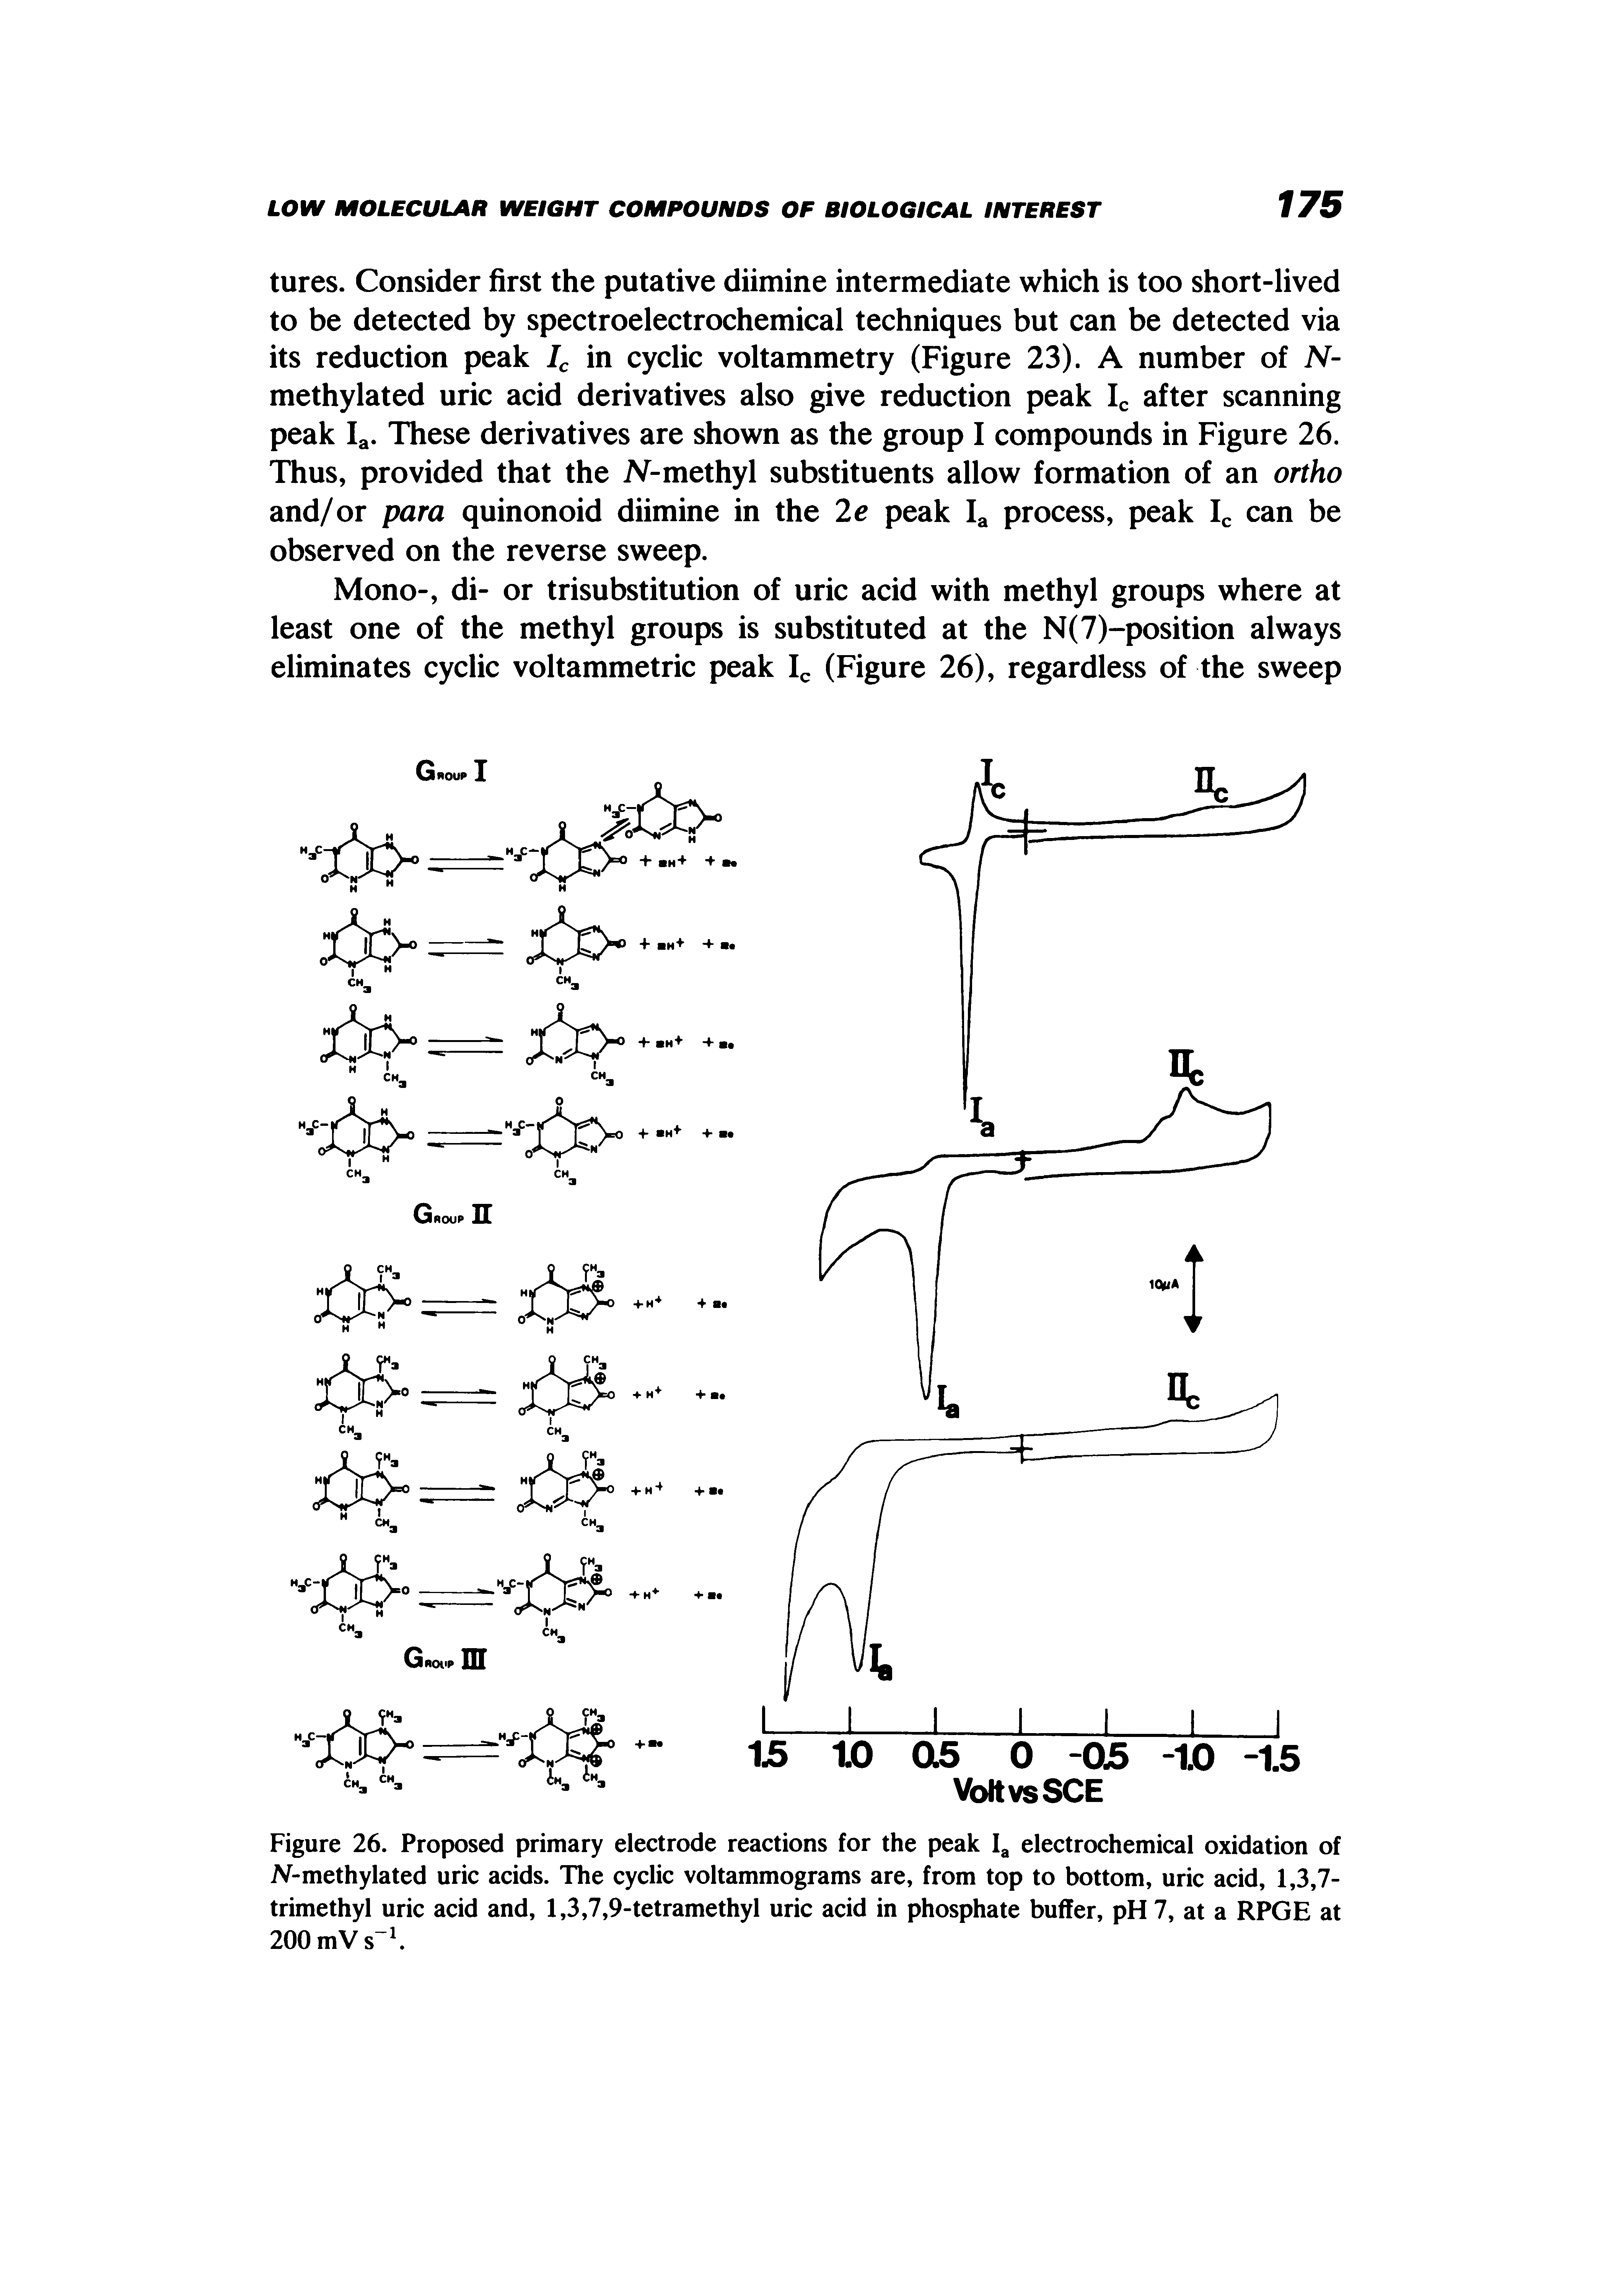 Figure 26. Proposed primary electrode reactions for the peak electrochemical oxidation of N-methylated uric acids. The cyclic voltammograms are, from top to bottom, uric acid, 1,3,7-trimethyl uric acid and, 1,3,7,9-tetramethyl uric acid in phosphate buffer, pH 7, at a RPGE at 200 mVs ...